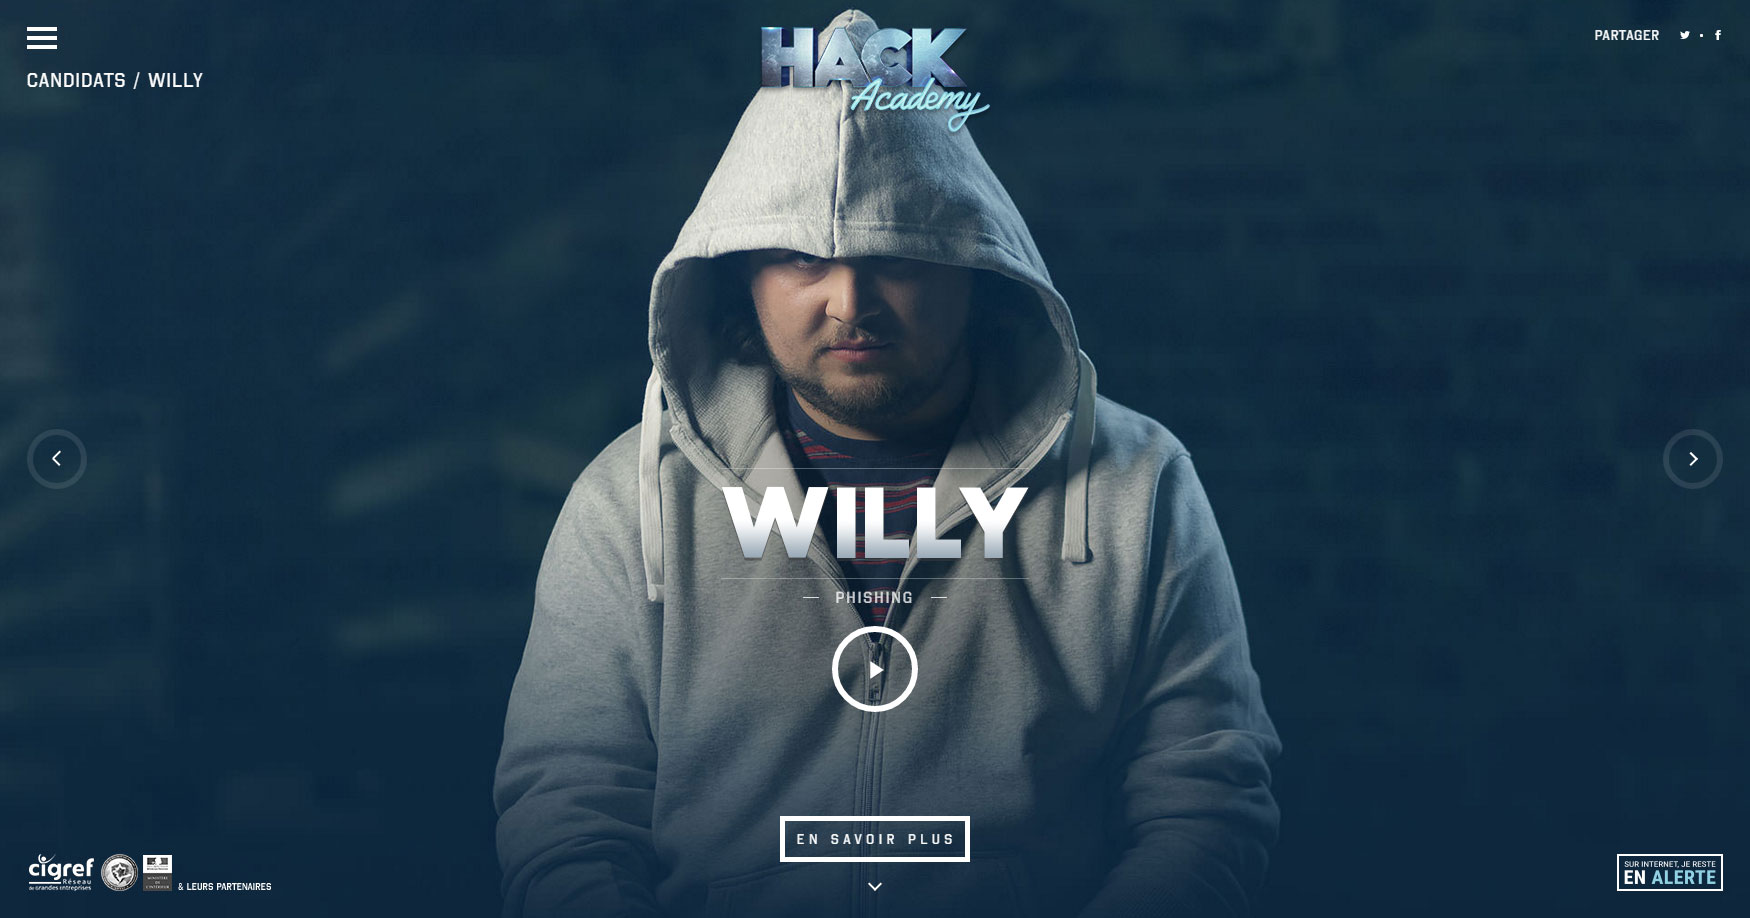 Hack Academy - Website of the Day